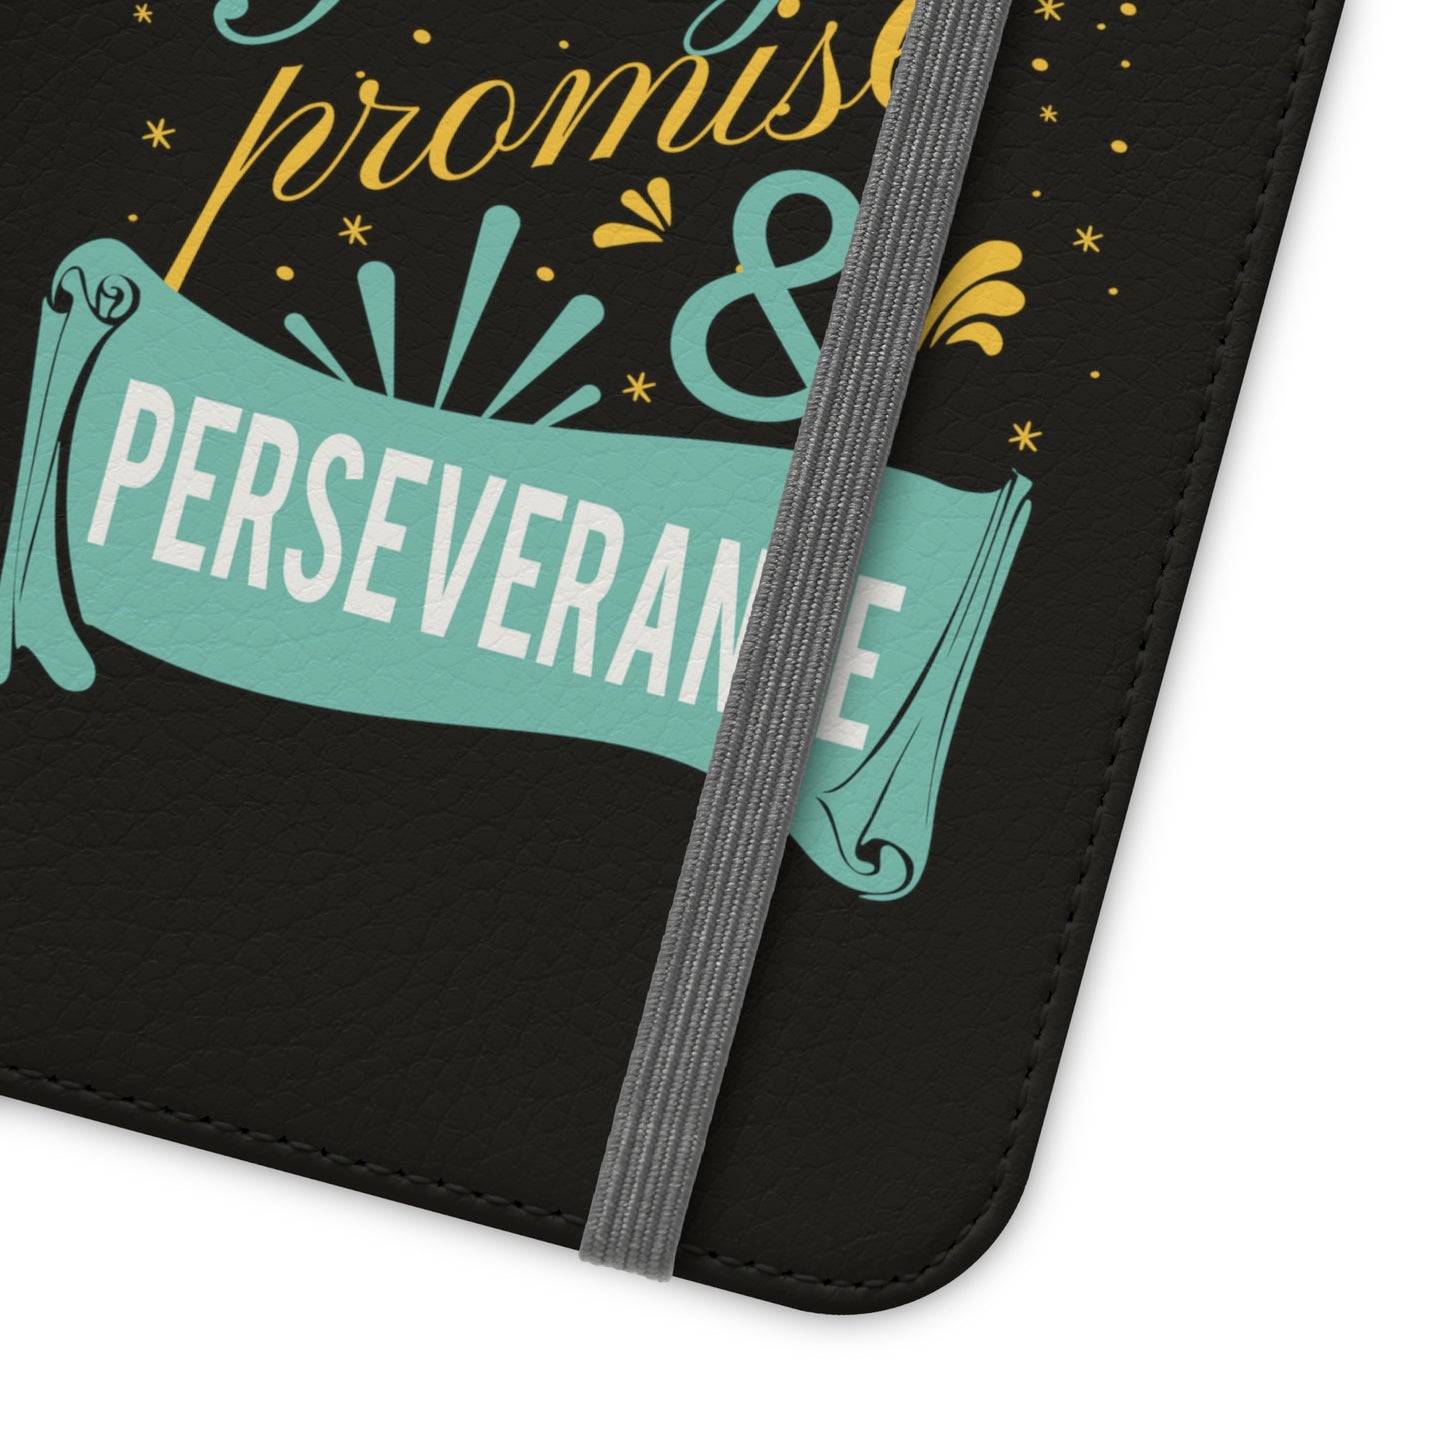 Product of Prayer, Promise, & Perseverance Phone Flip Cases